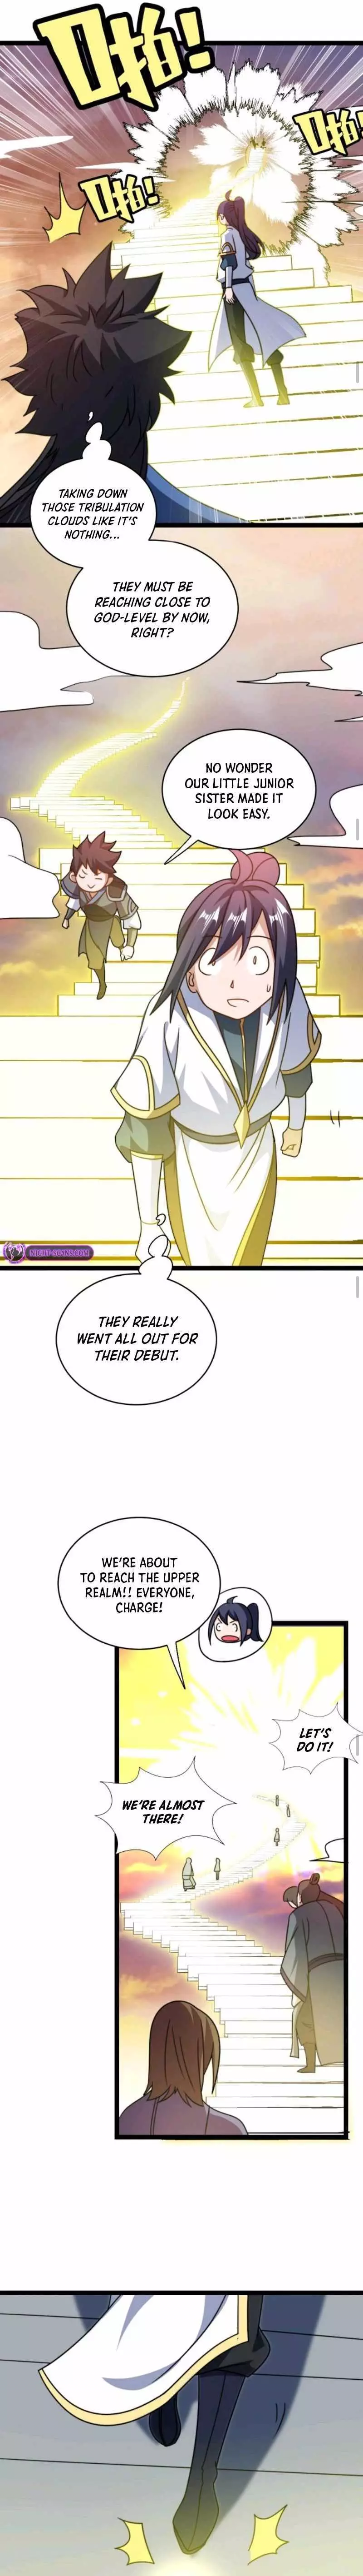 Fusion Fantasy: I, Invincibility Starting As The Prodigal! - 192 page 7-cabf137b